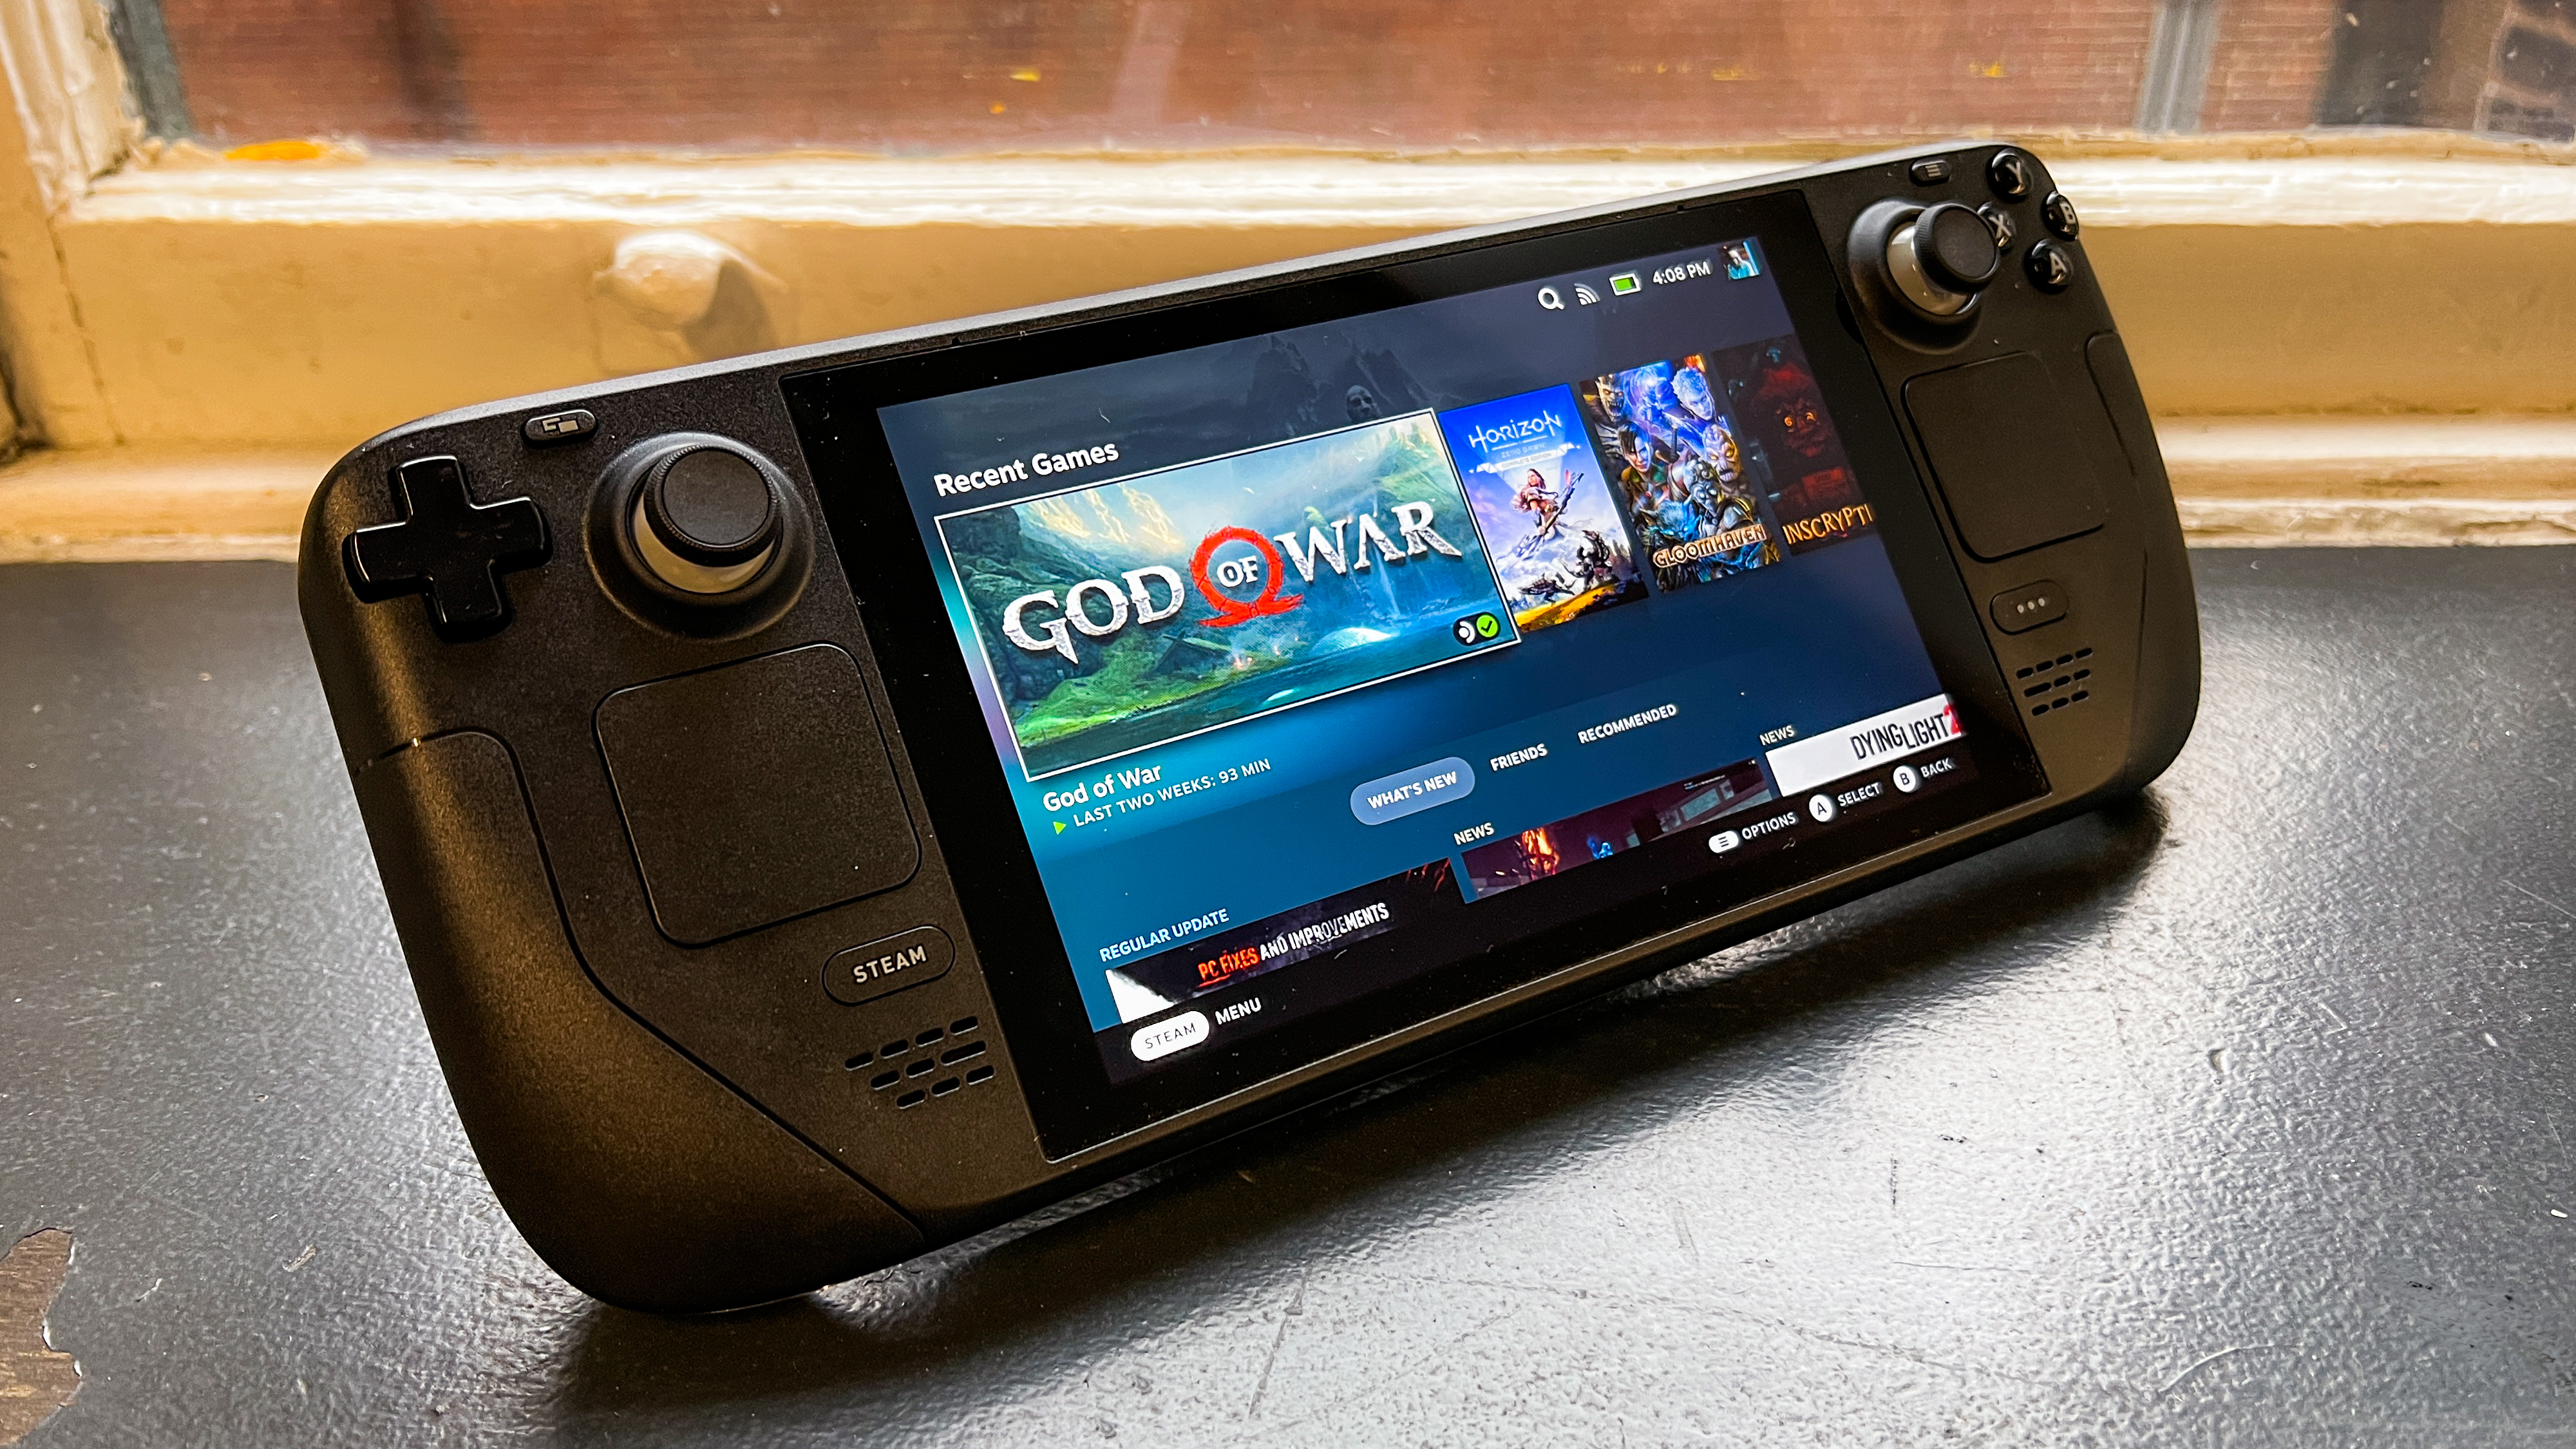 Steam Deck Review: This Handheld Gaming PC Surprised Me, in Ways Both Good and Bad - CNET